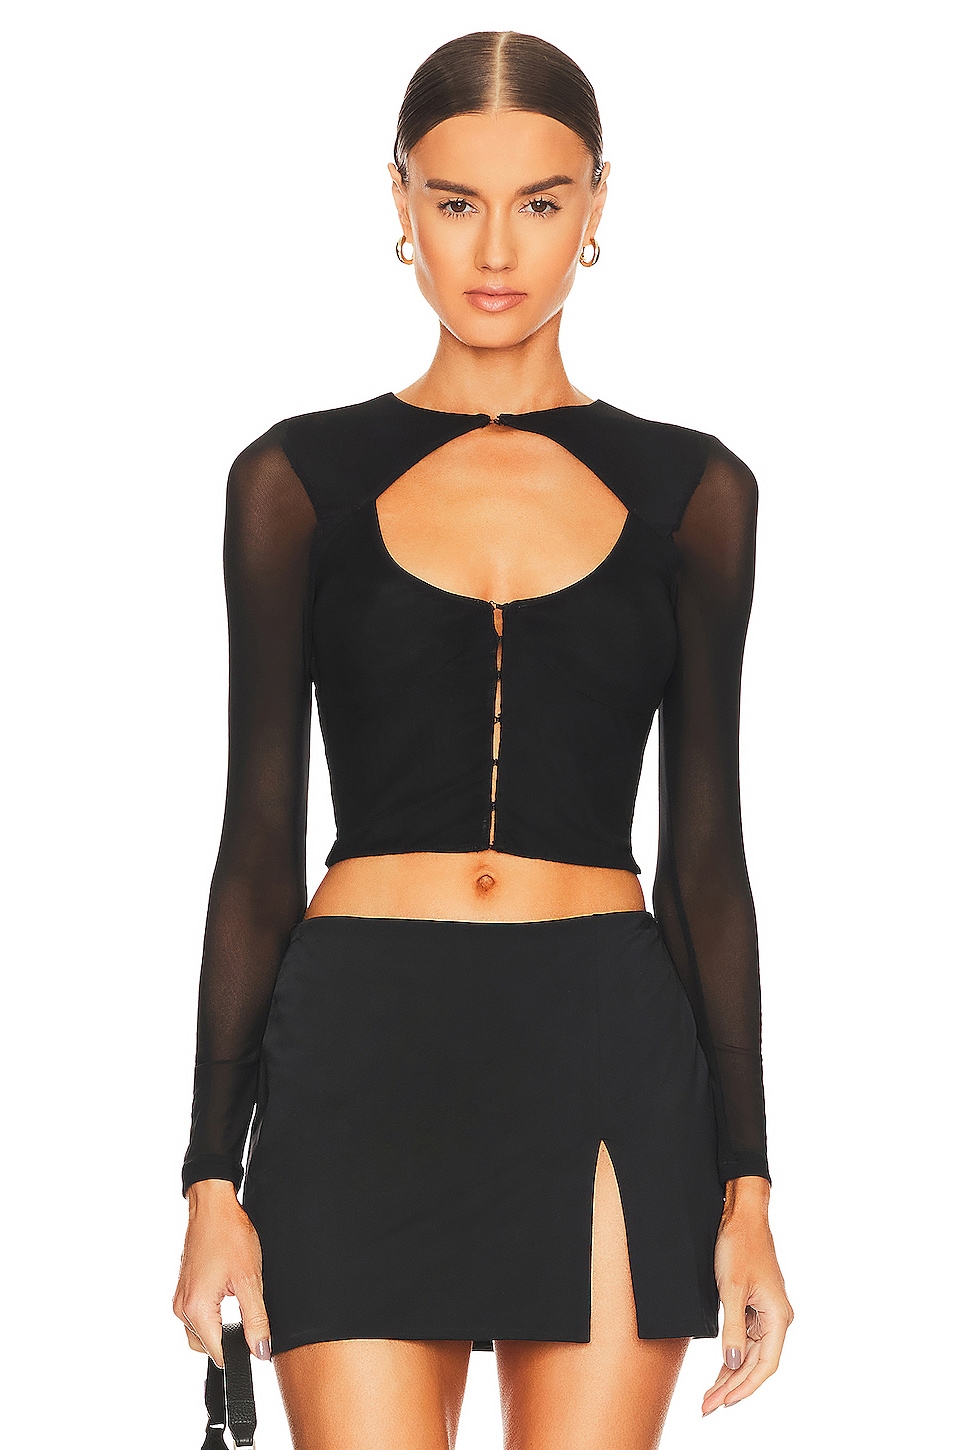 ASYOU corset hook and eye top in black